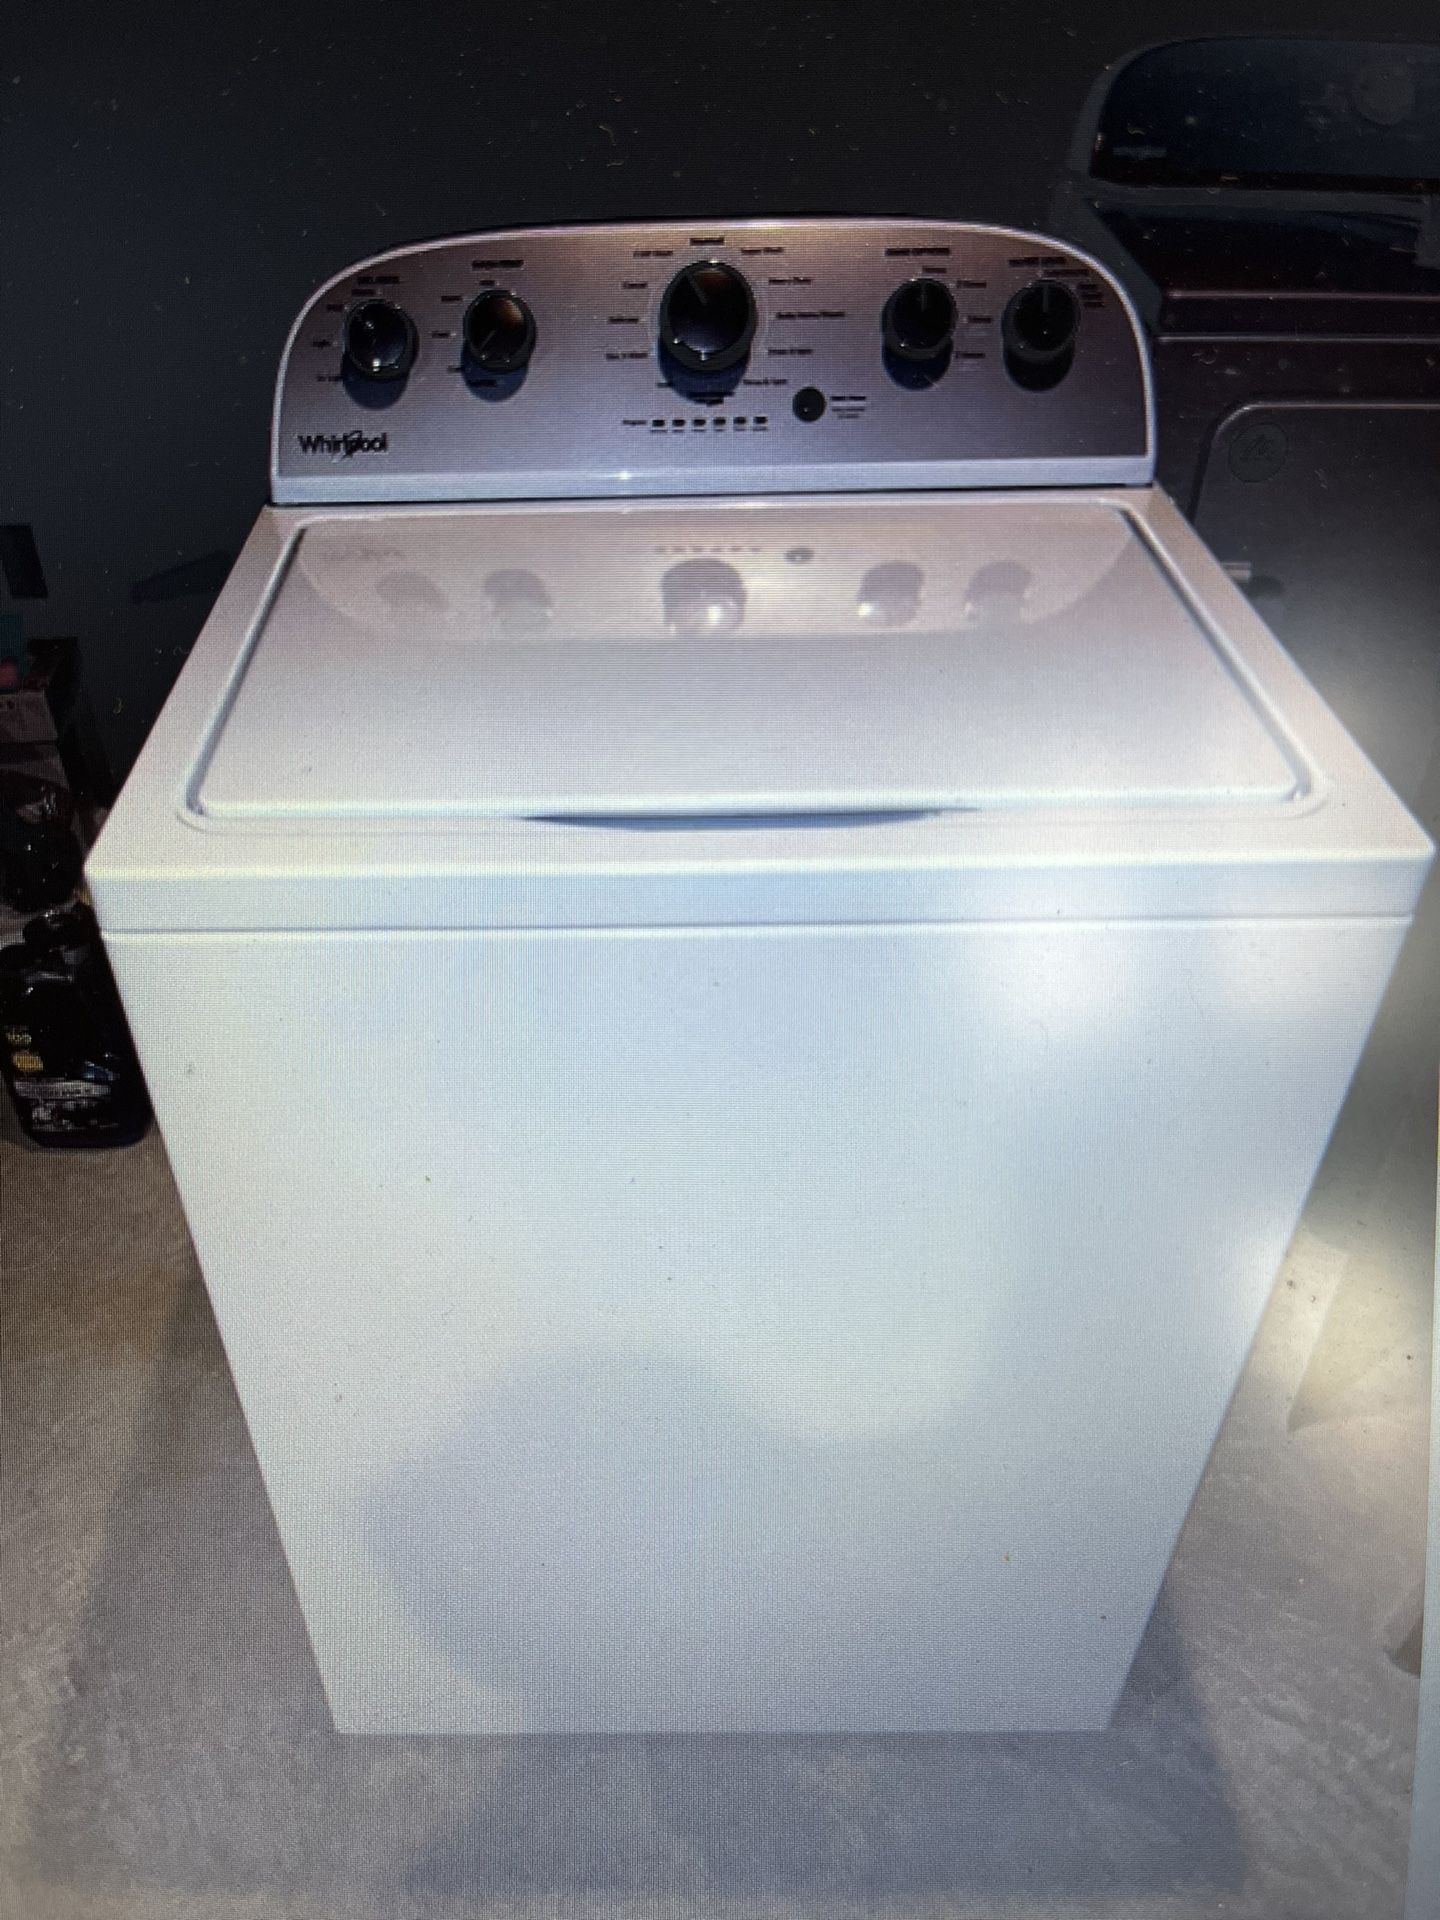 Like New Whirlpool, Washer And Dryer Set